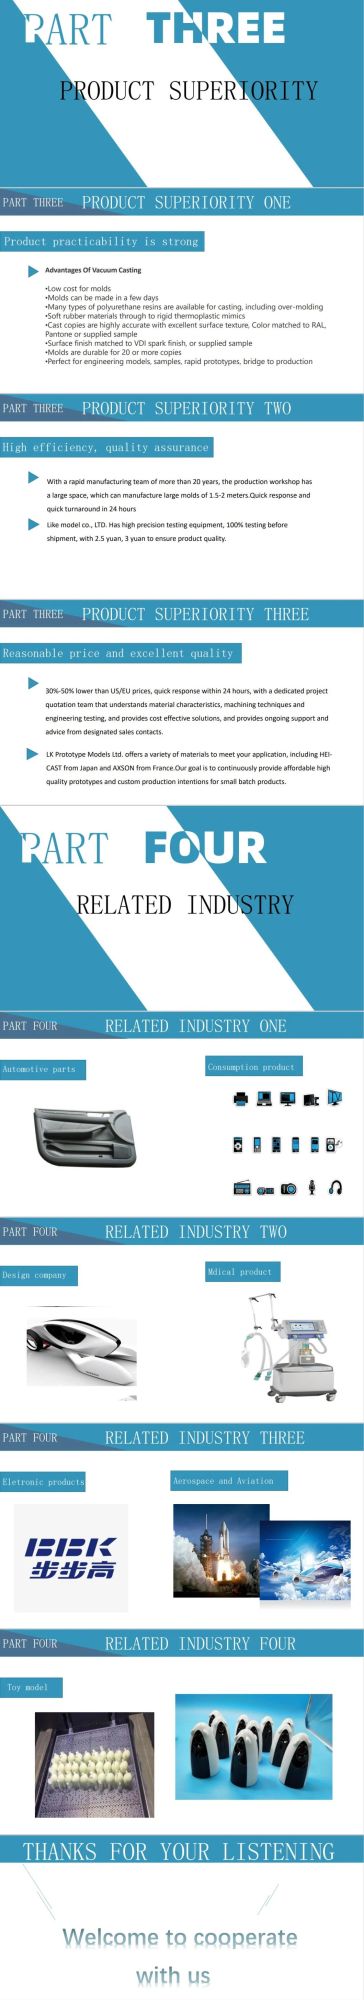 Factory Customizetion Sheet Metal/Stamping/Steel Aluminum Part Products/Fabrication Mobile Phone Case/Shell/Enclosure